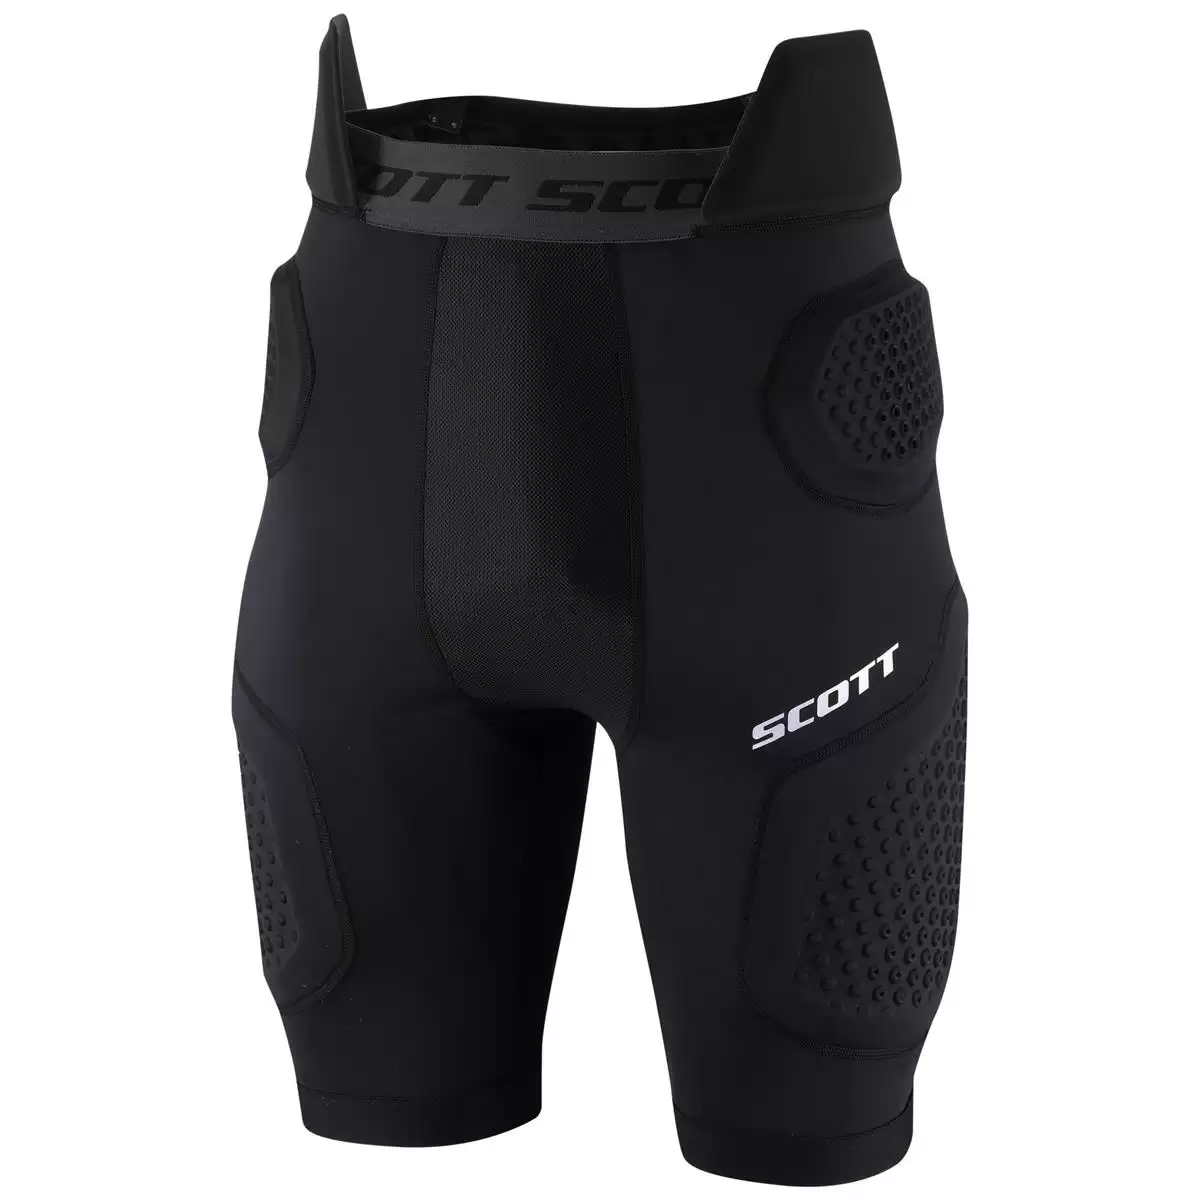 Short protector Softcon air black - Size XL - image